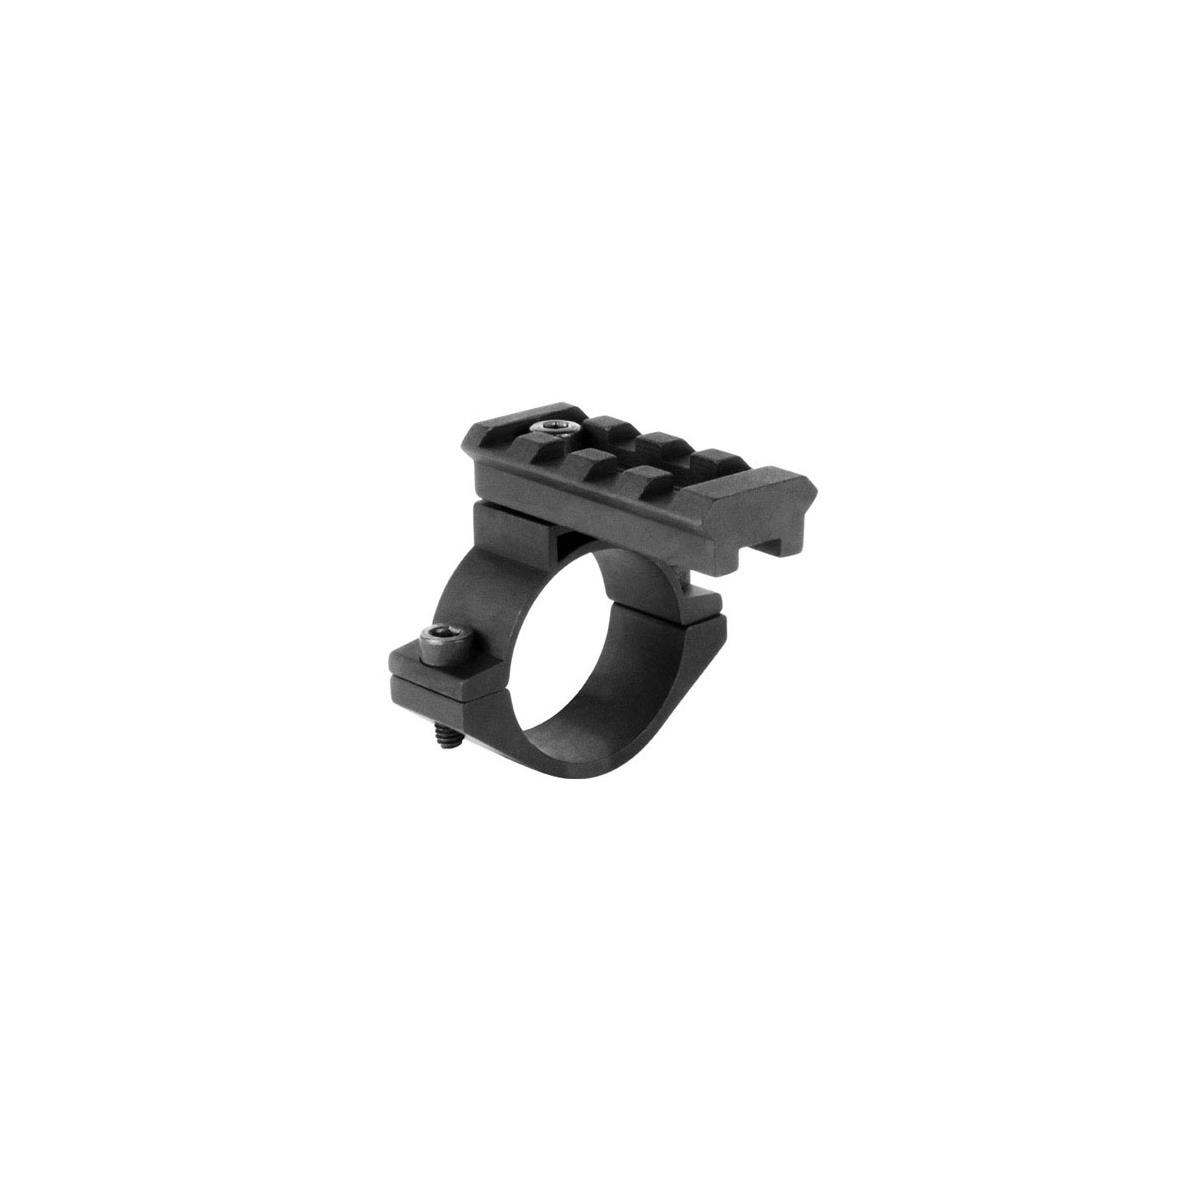 Image of AIM Sports Adjustable 30mm Scope Adapter/Picatinny Base